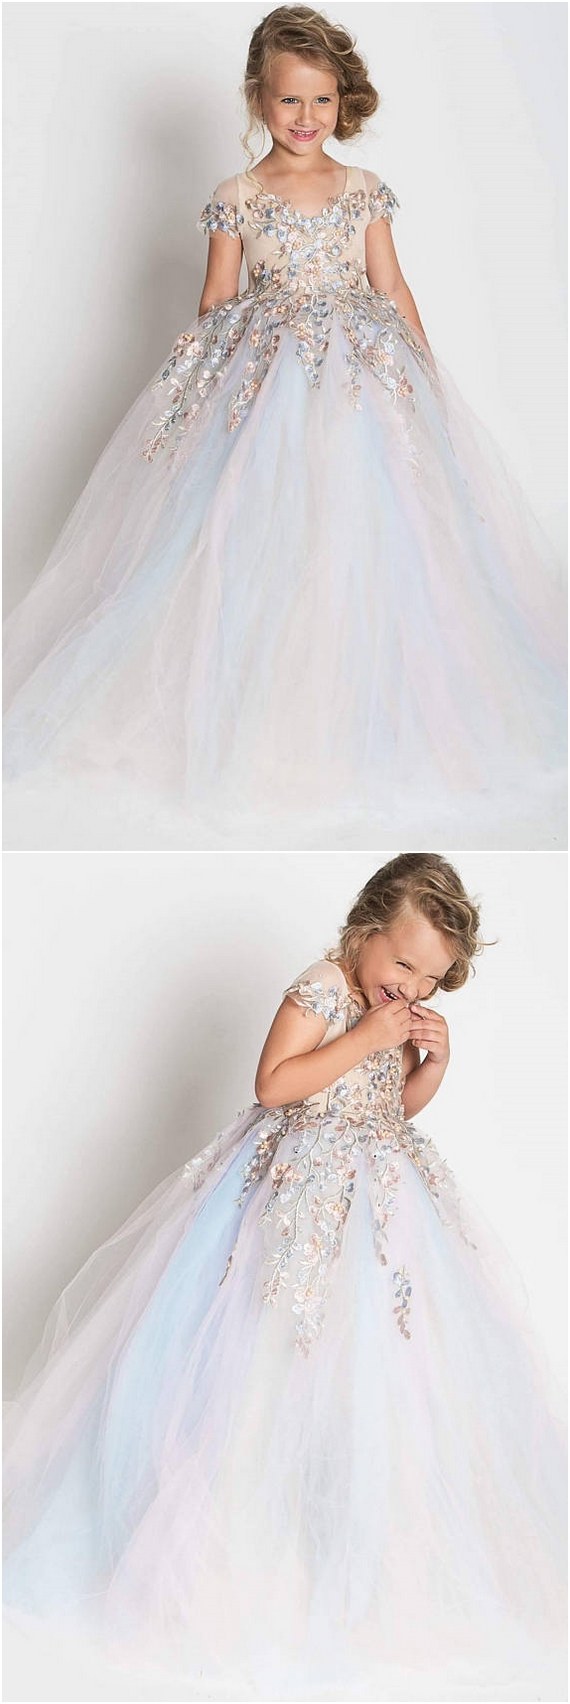 blue and pink embroidery flower girl tutu dress